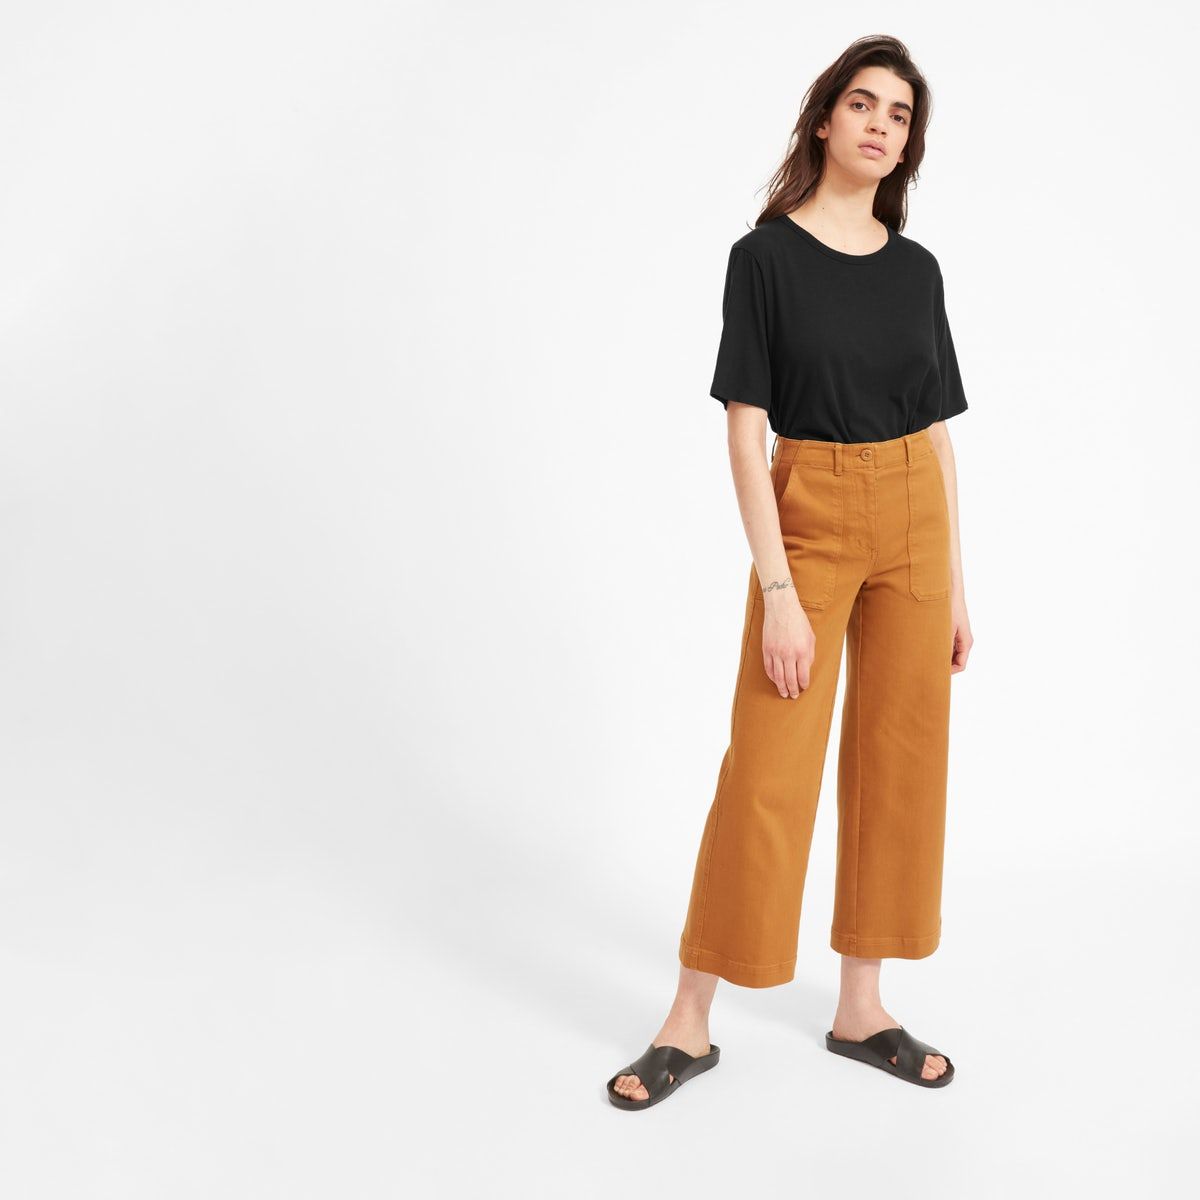 Everlane Just Launched Light as Air T-Shirts | Who What Wear